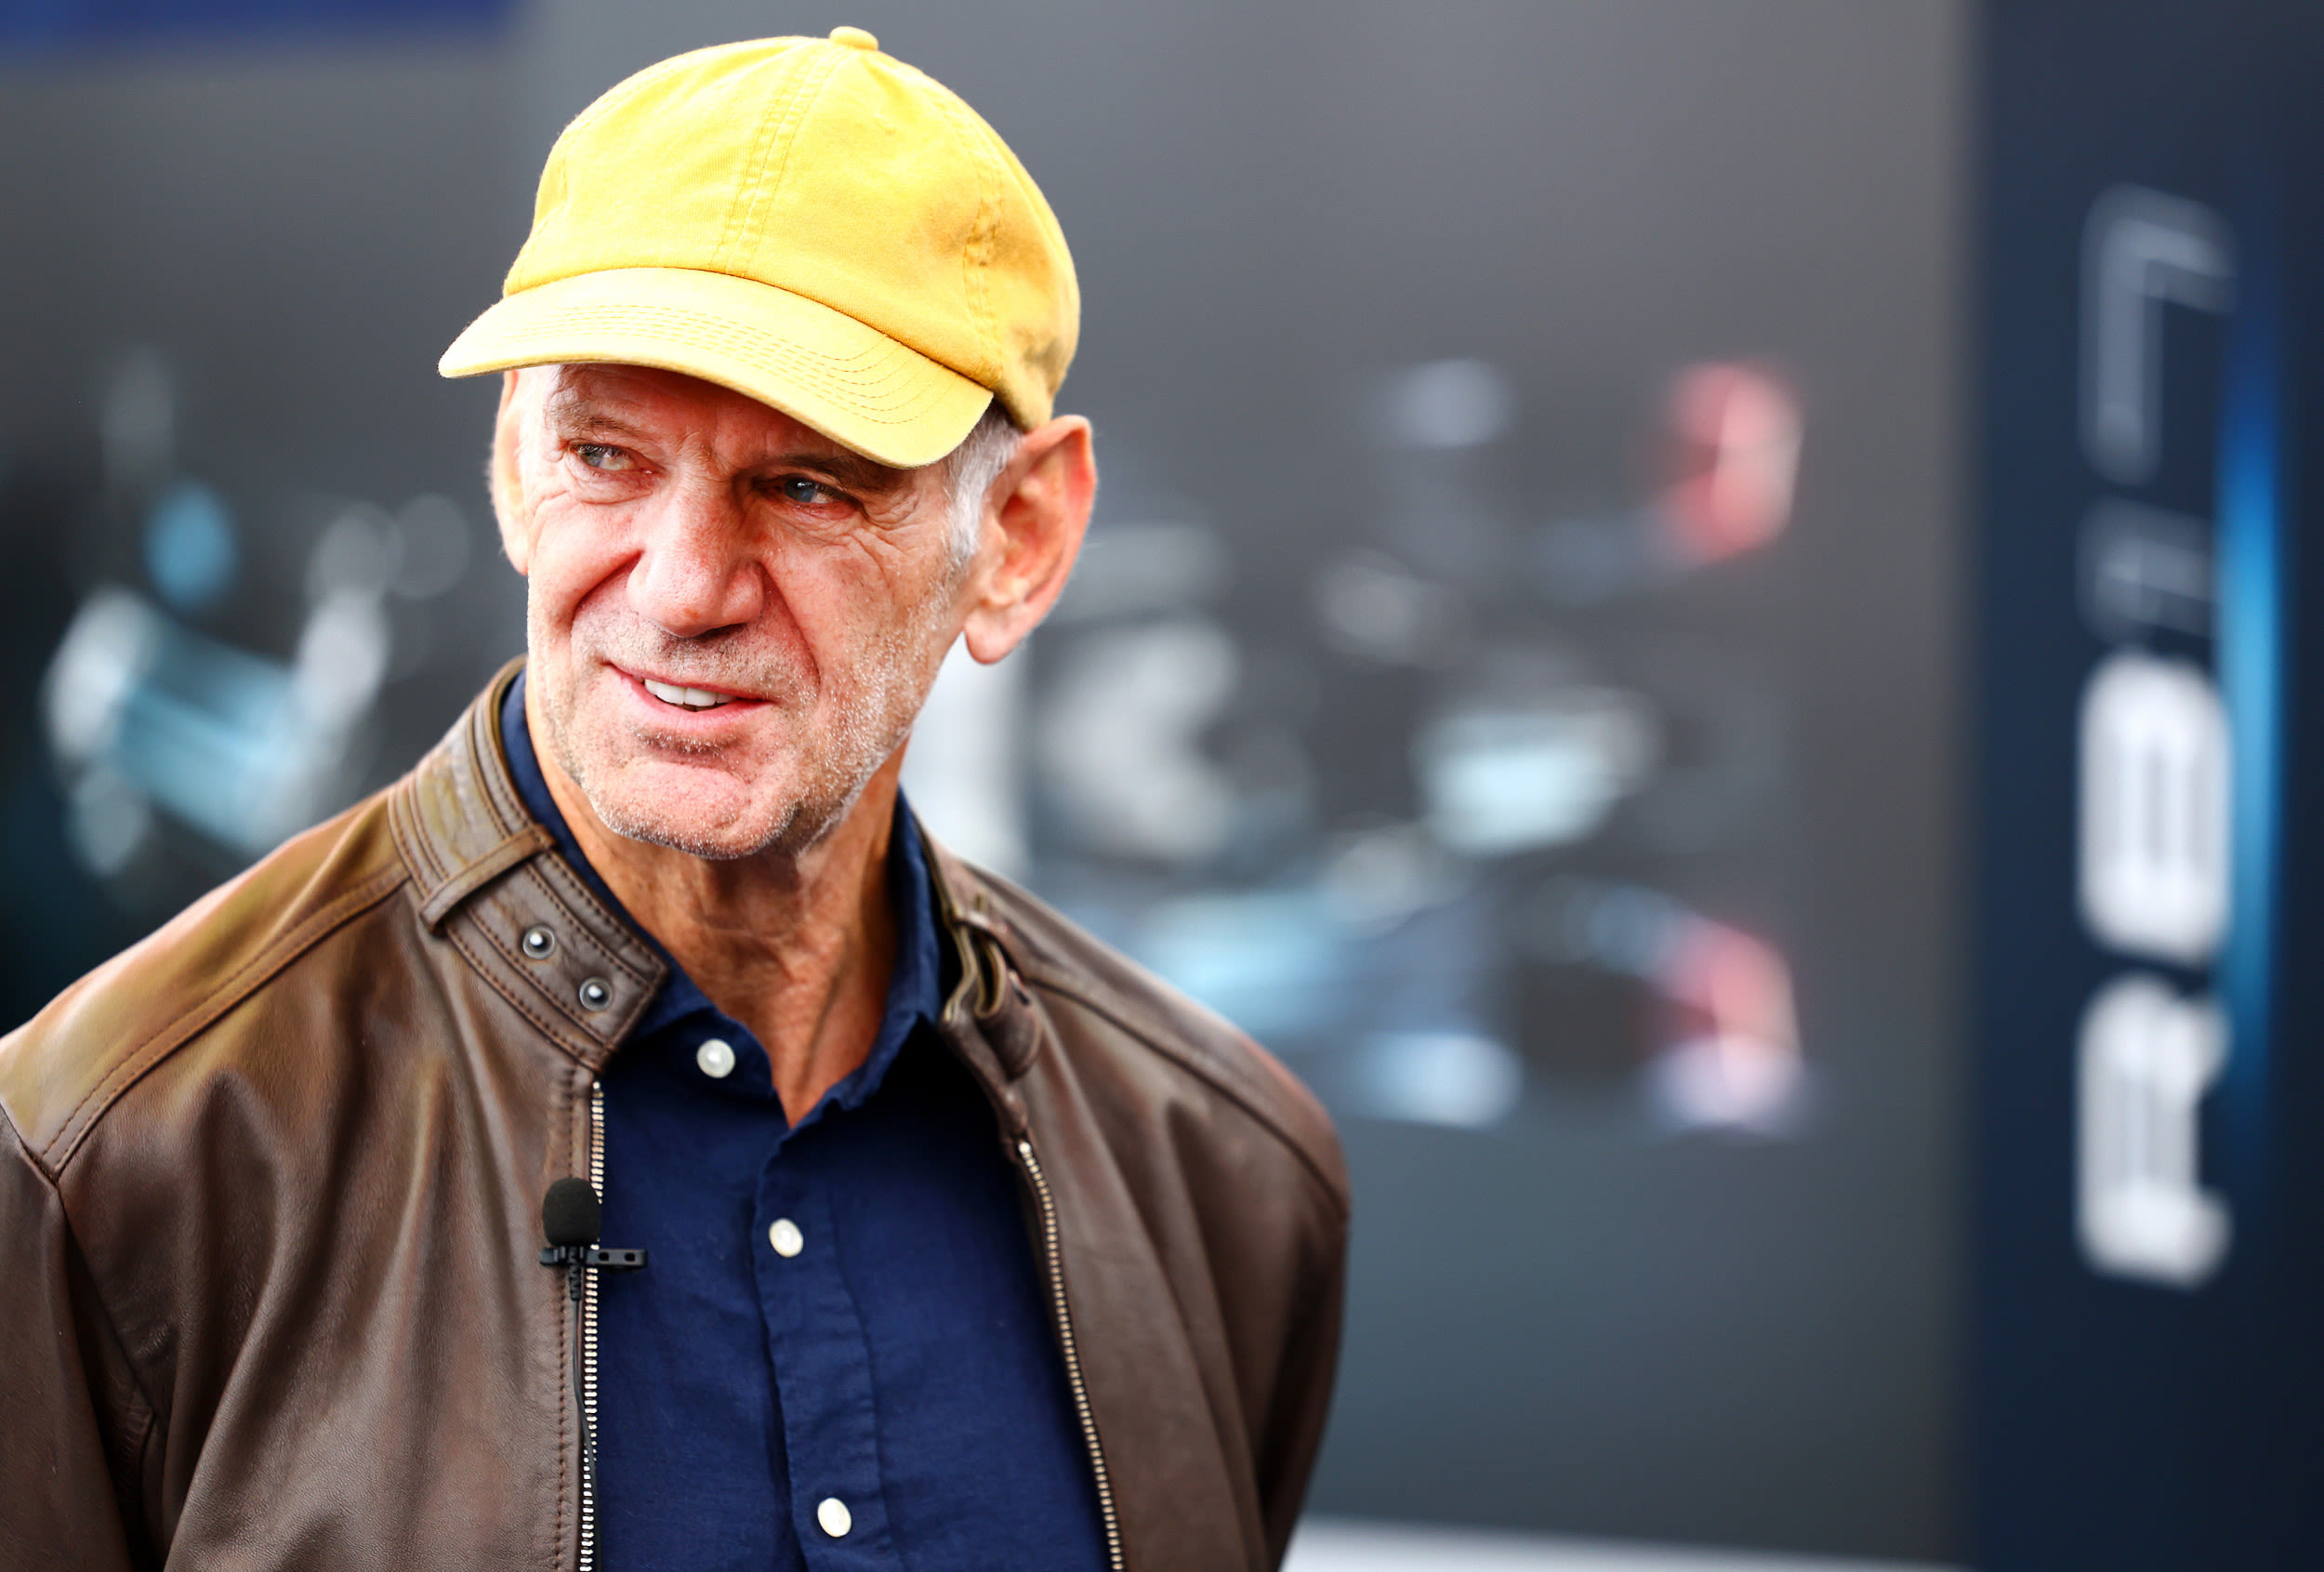 Adrian Newey Clarifies Stance On F1 Future As Red Bull Departure Looms